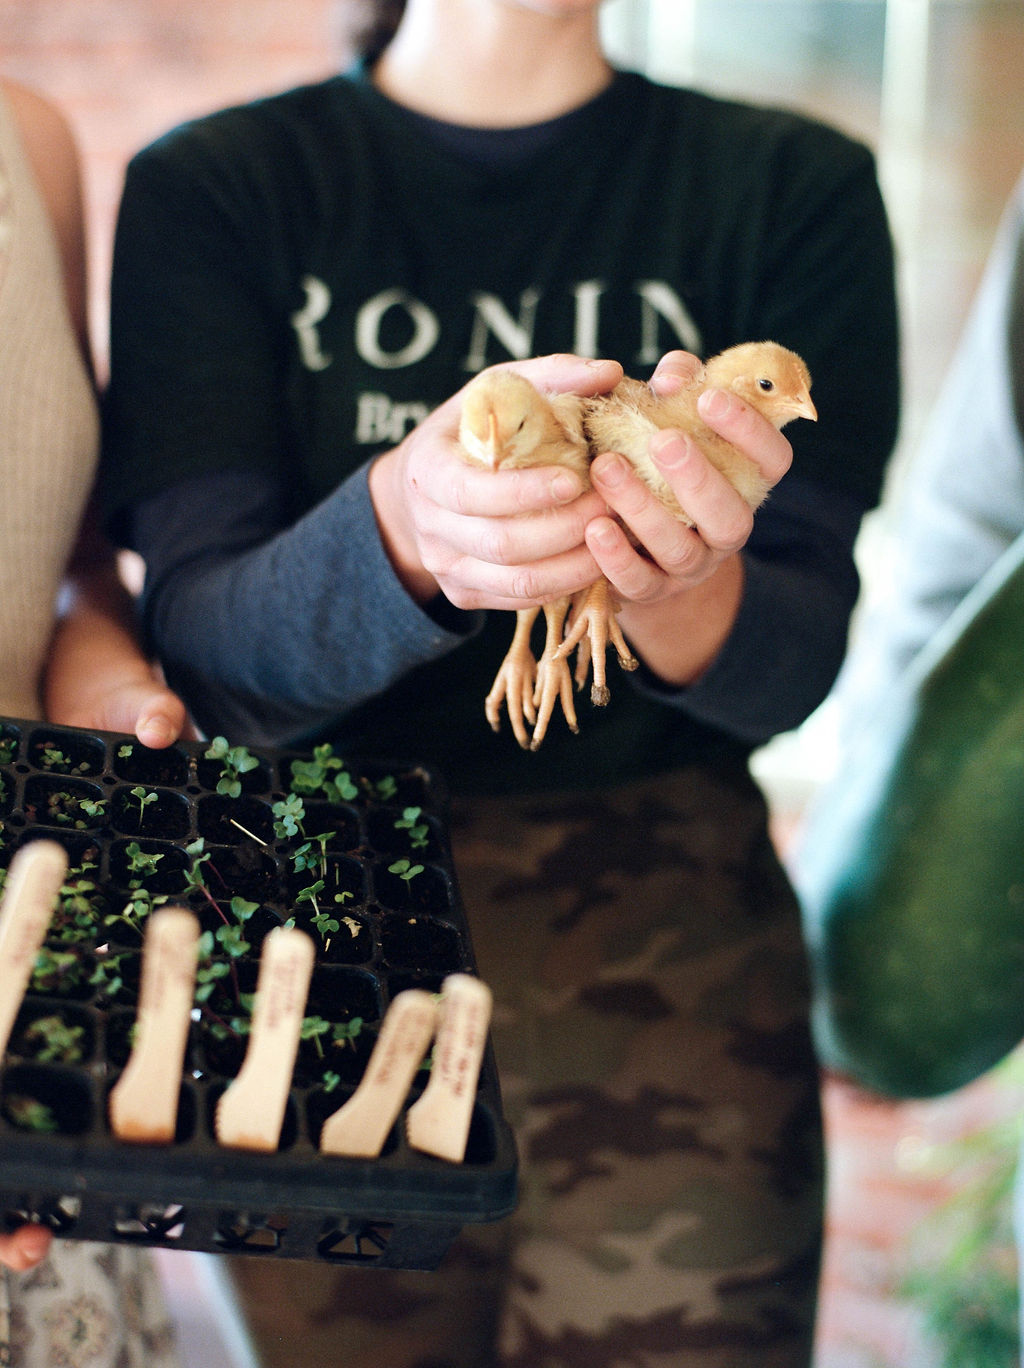 Farm working holding baby chicks